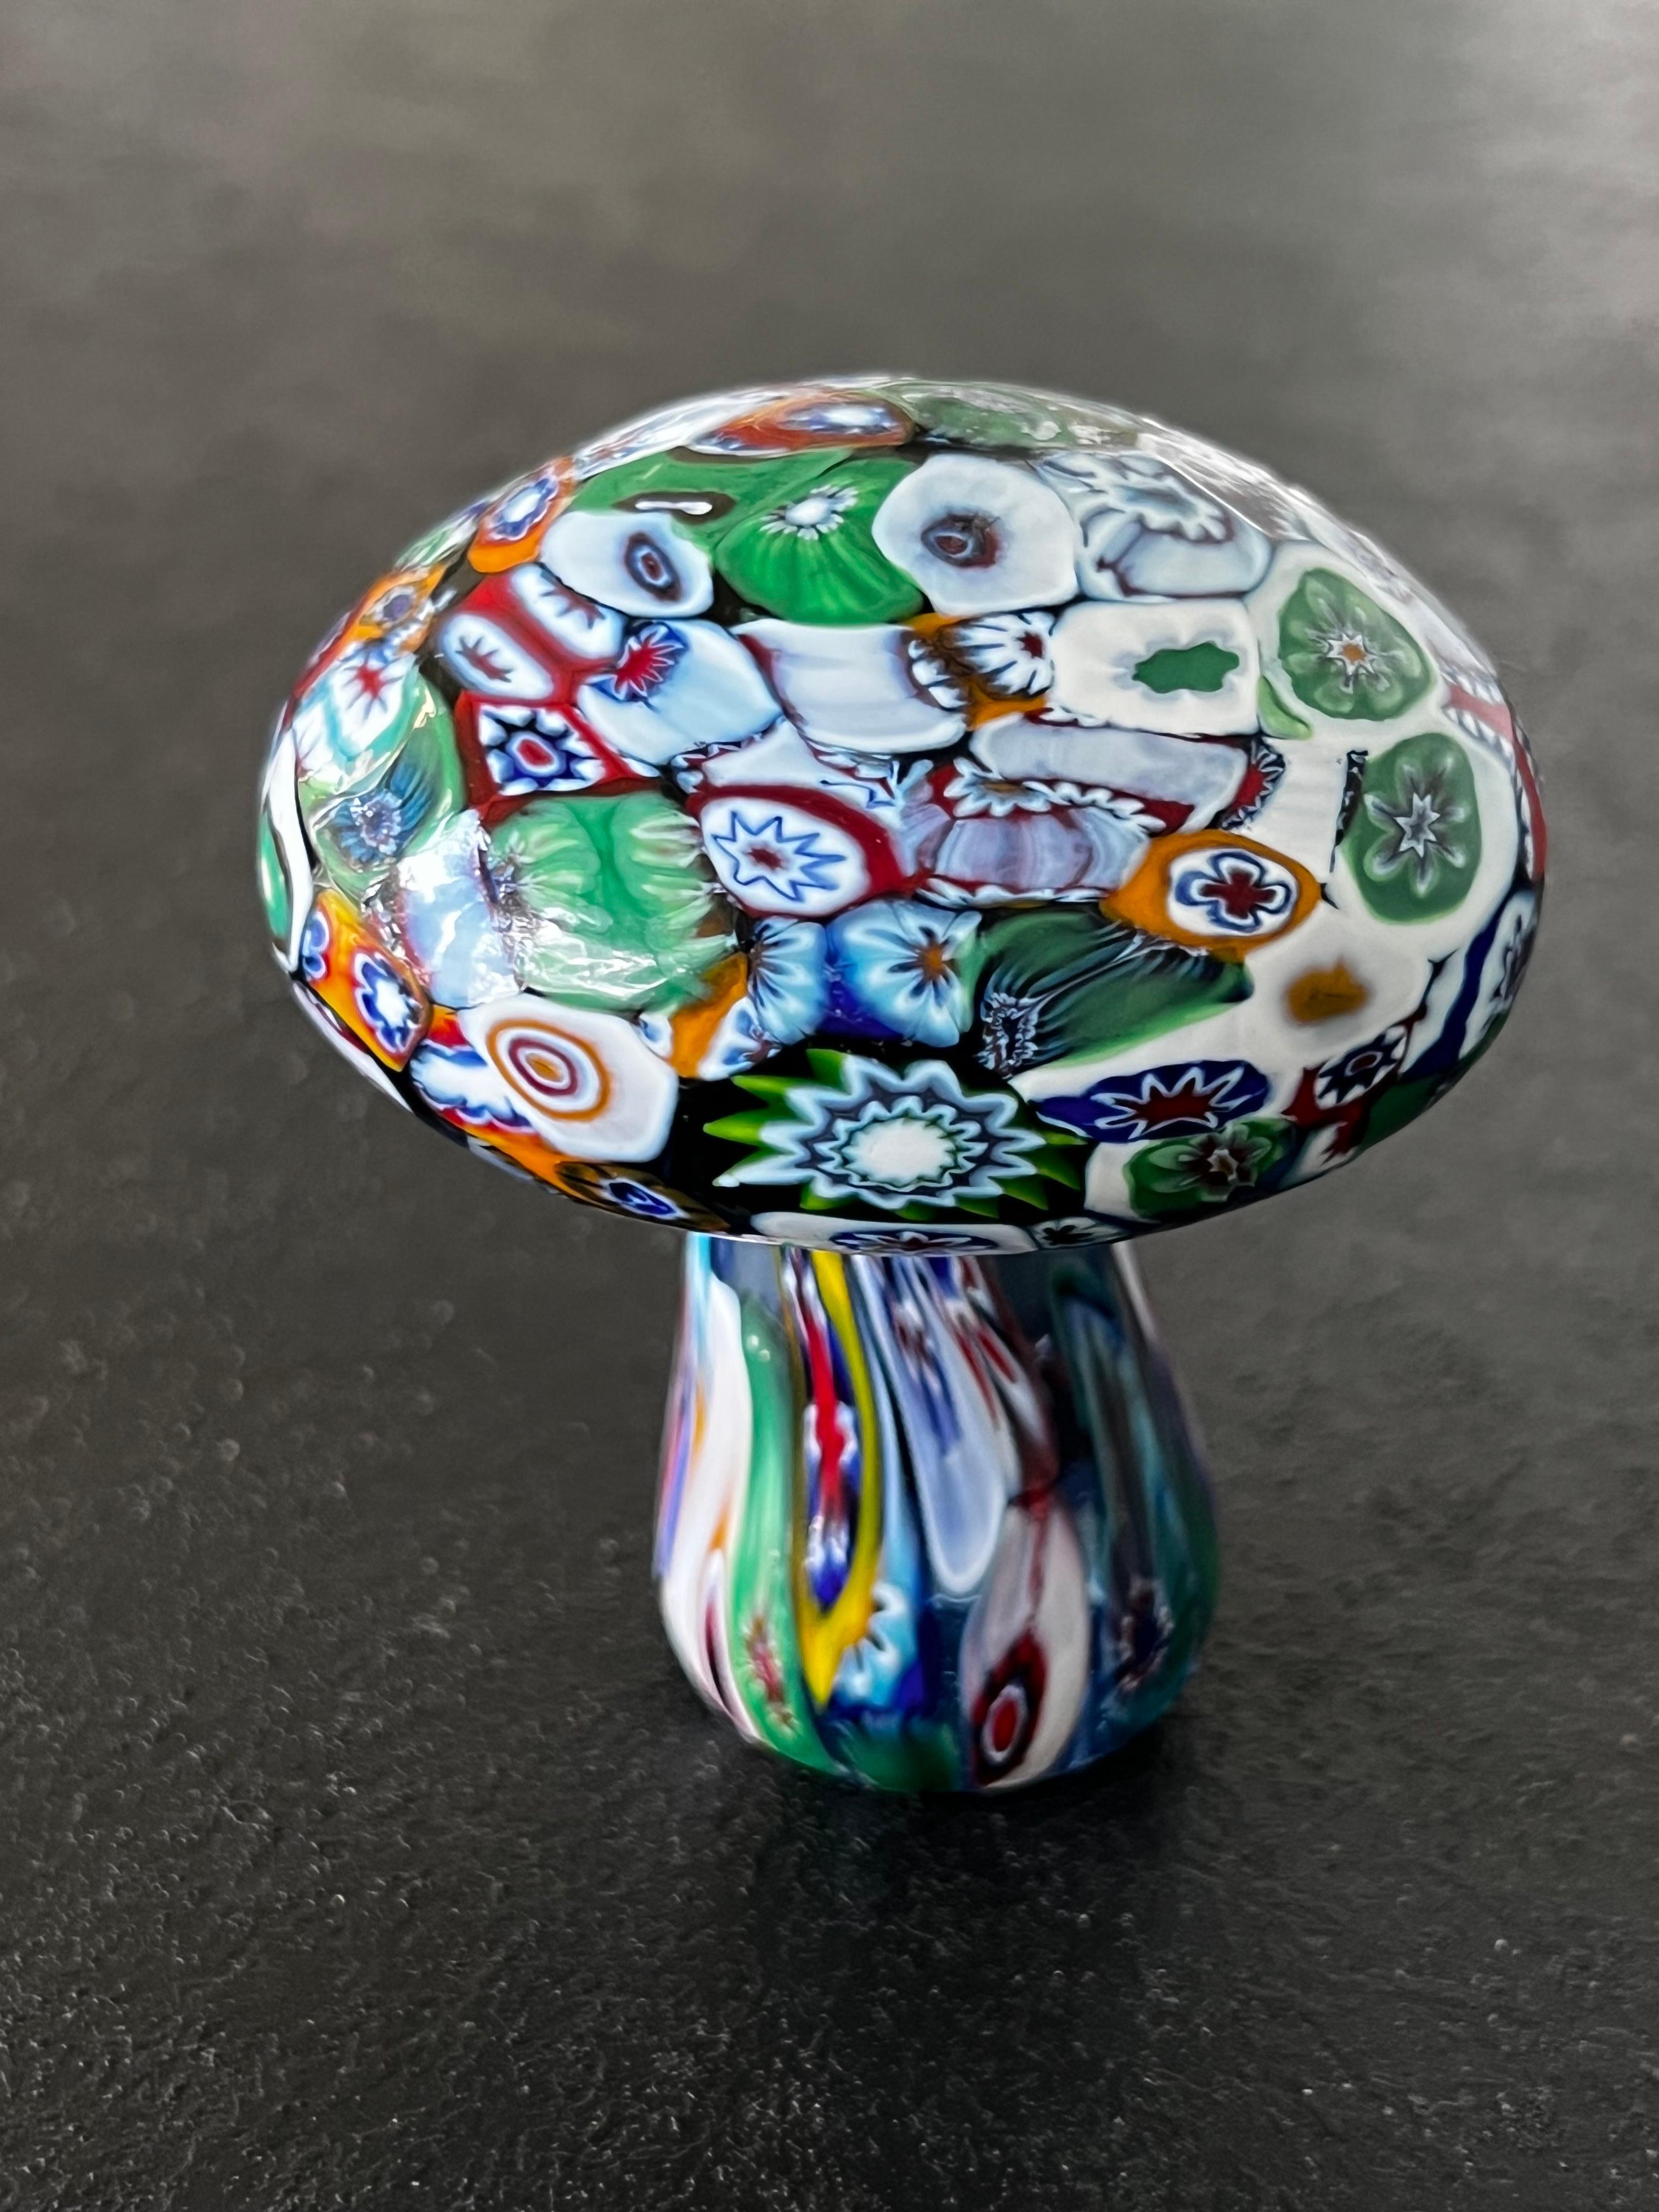 Beautiful vintage glass millefiori paperweight shaped like a mushroom. would perfect to styled a bookcase or to add to your glass collection.